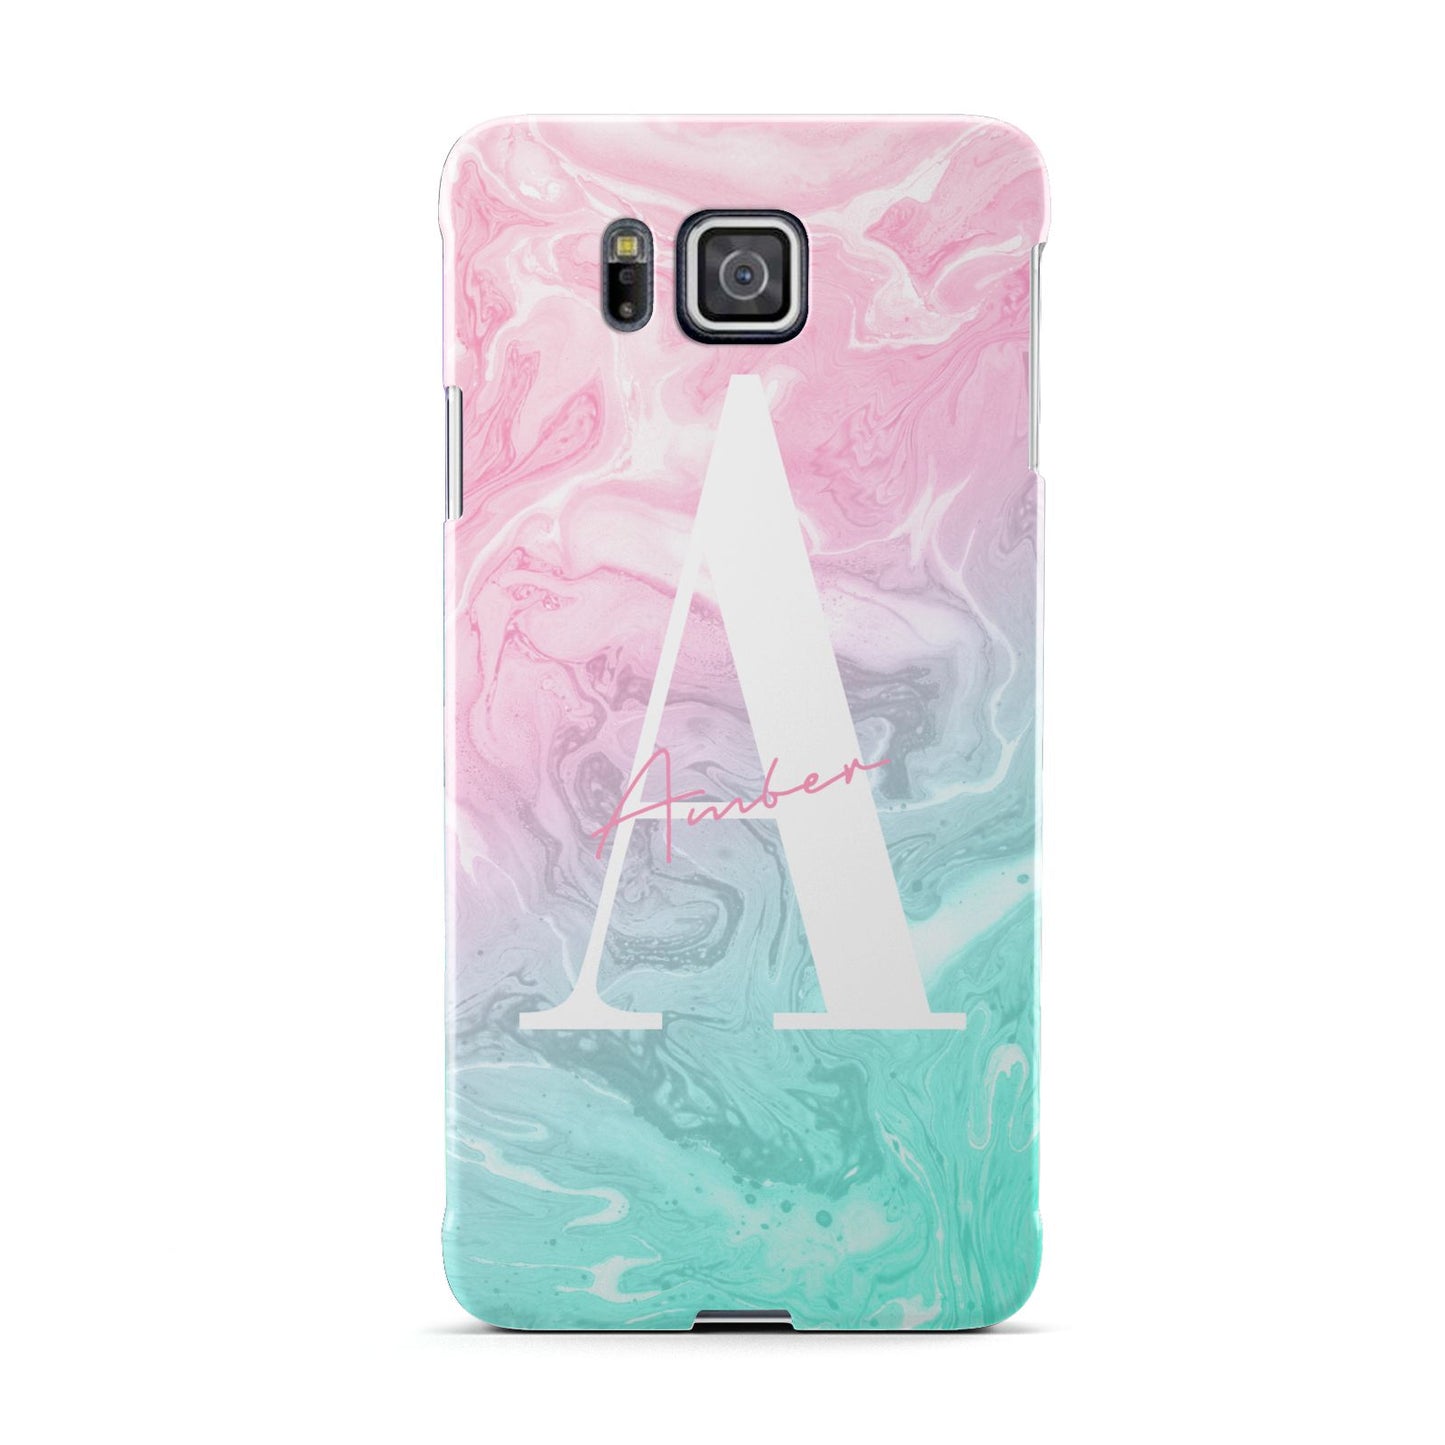 Monogrammed Pink Turquoise Pastel Marble Samsung Galaxy Alpha Case